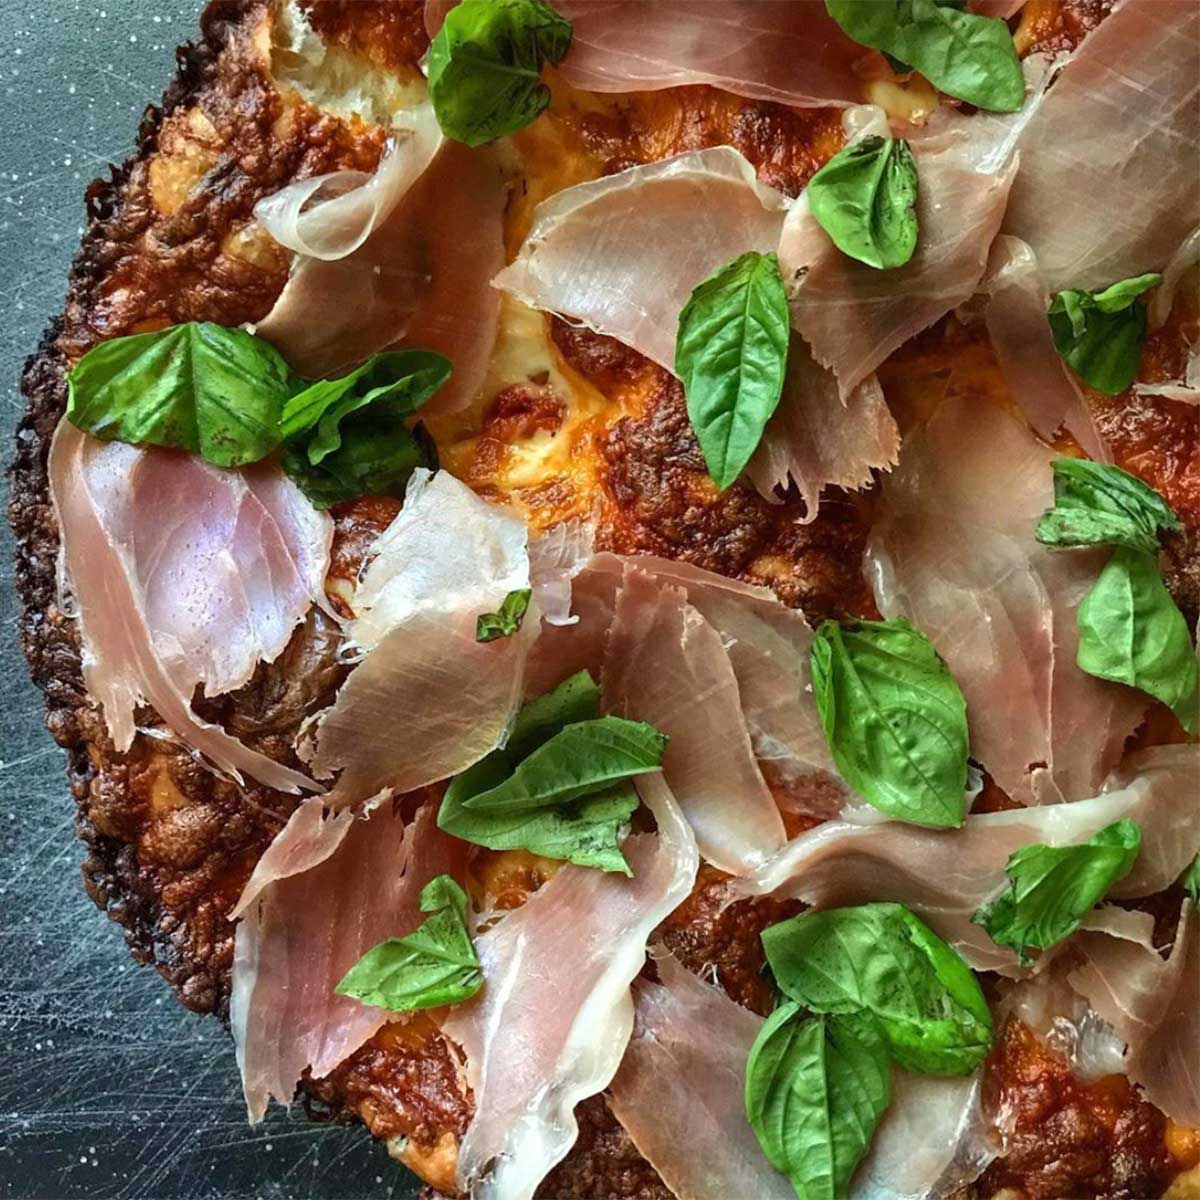 Pizza topped with basil and prosciutto